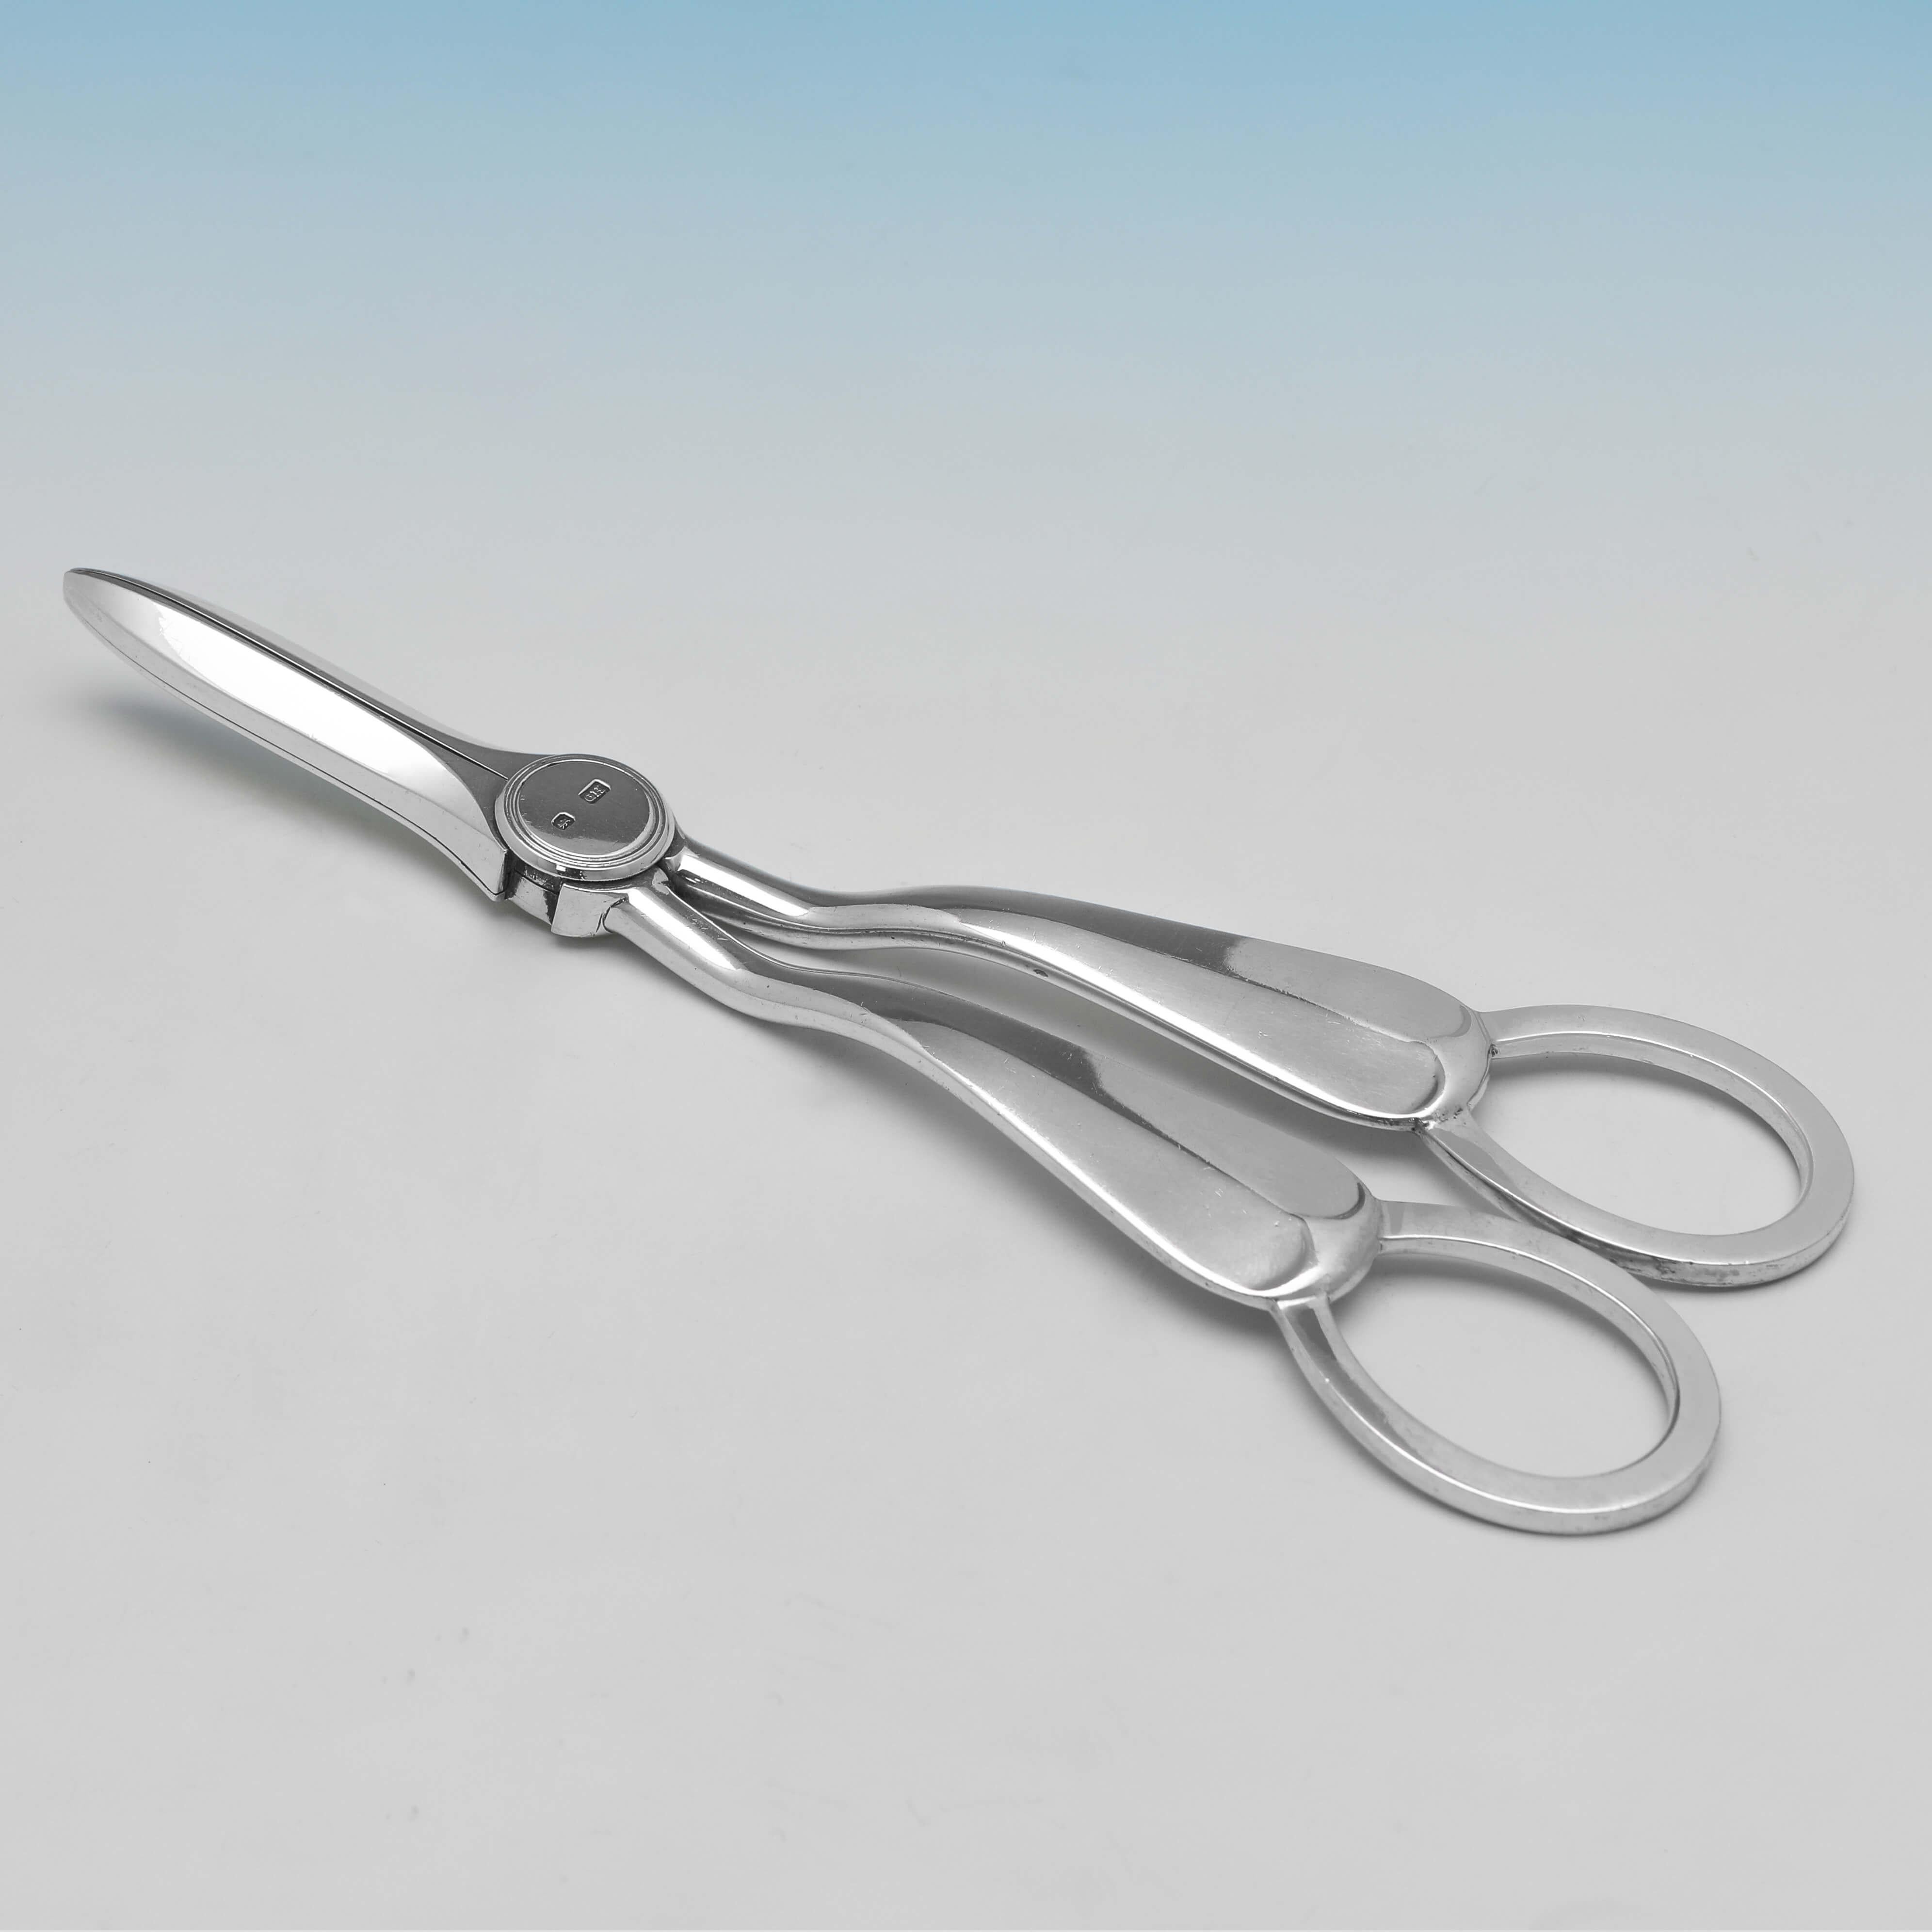 Hallmarked in Sheffield in 1911 by George Howson, this handsome pair of Antique Sterling Silver Grape Shears, are in 'Rattail' pattern, and are presented in their original box. 

The grape shears measures 6.25